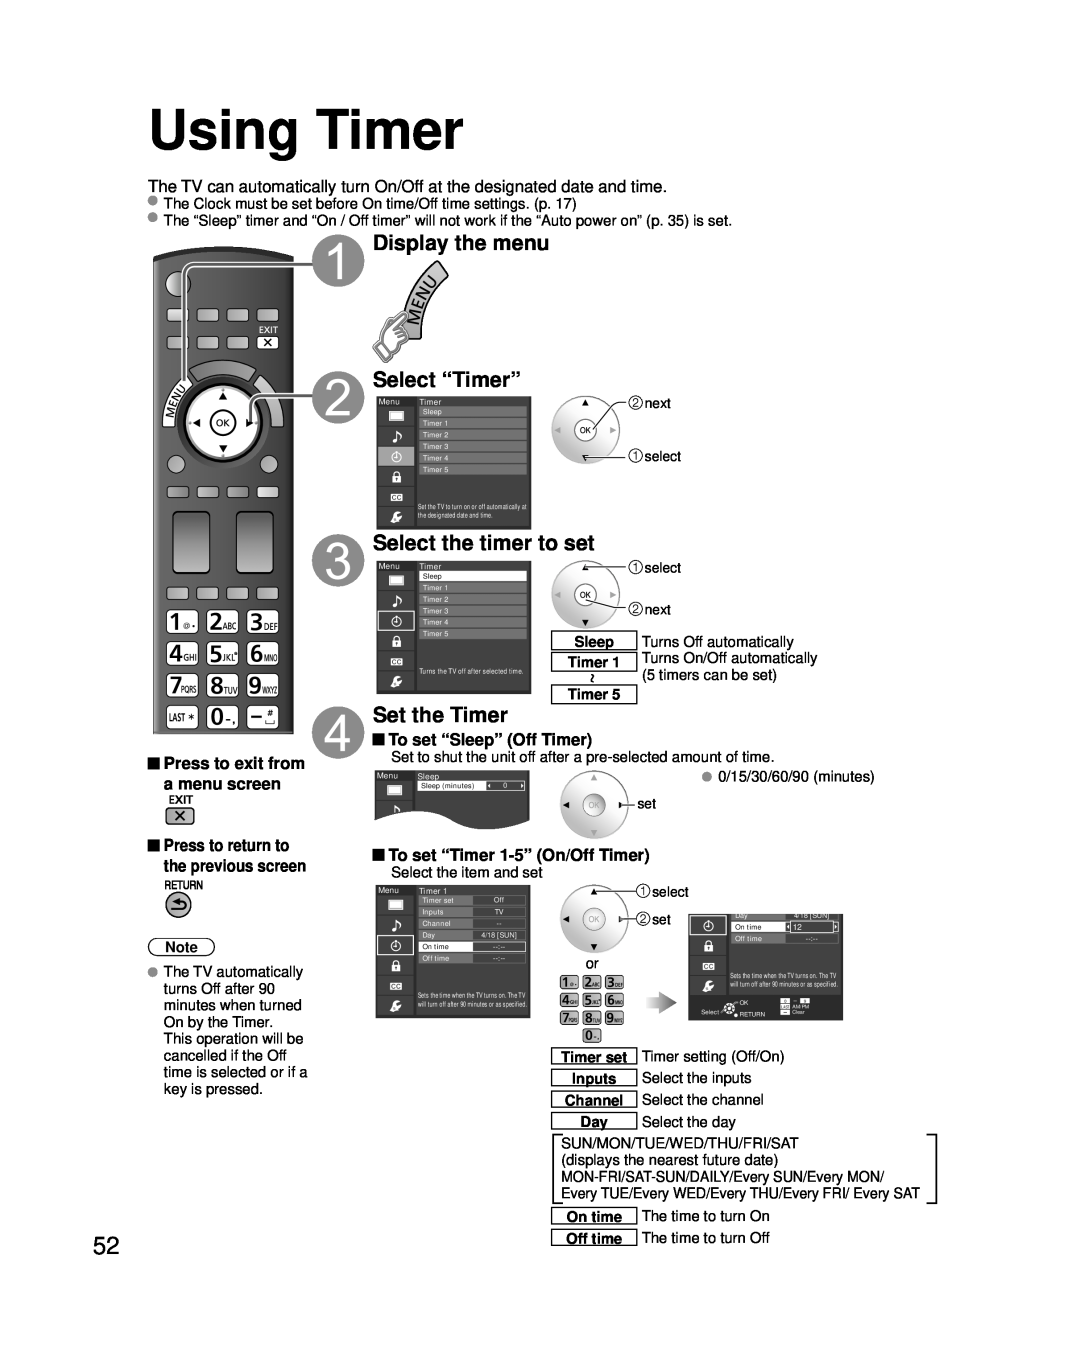 Panasonic TC-P42G25 Using Timer, The TV can automatically turn On/Off at the designated date and time, timers can be set 